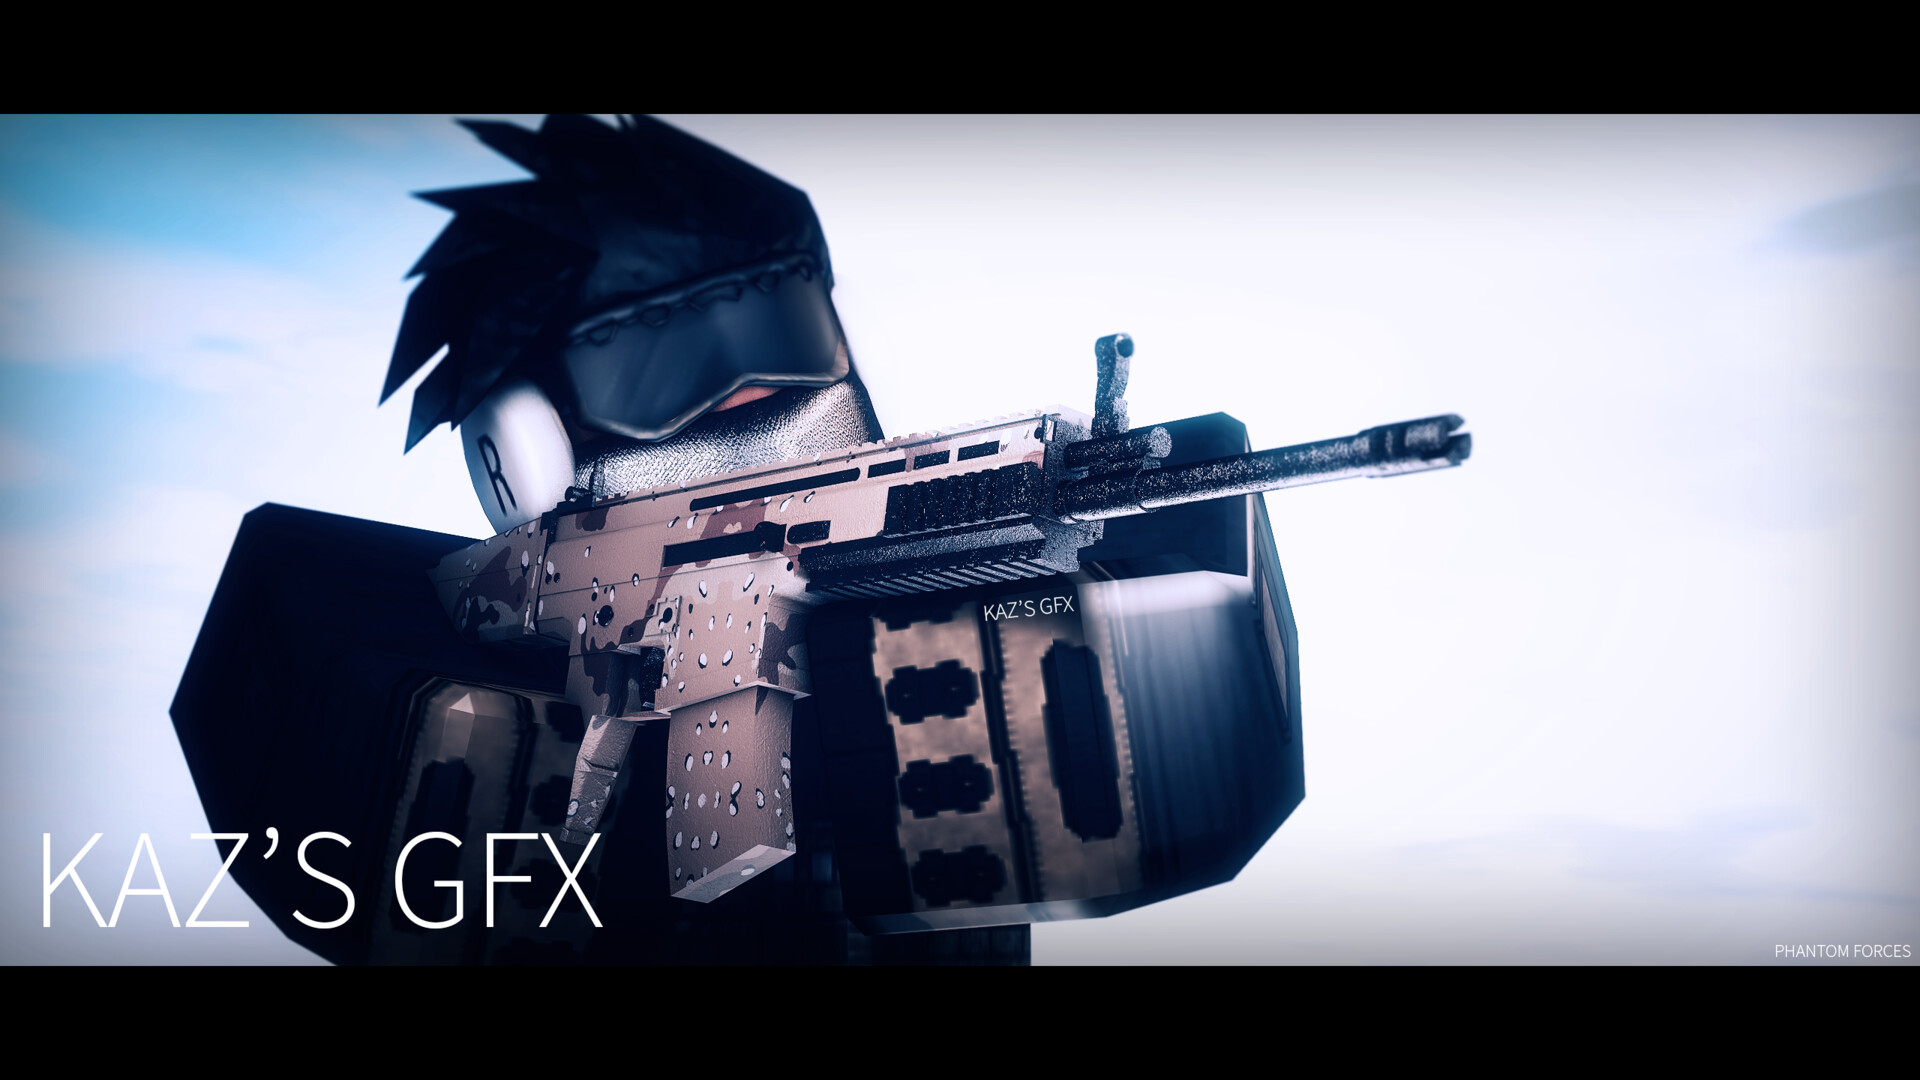 Phantom Forces - Ruin (rendered in Unreal Engine 5) : r/roblox